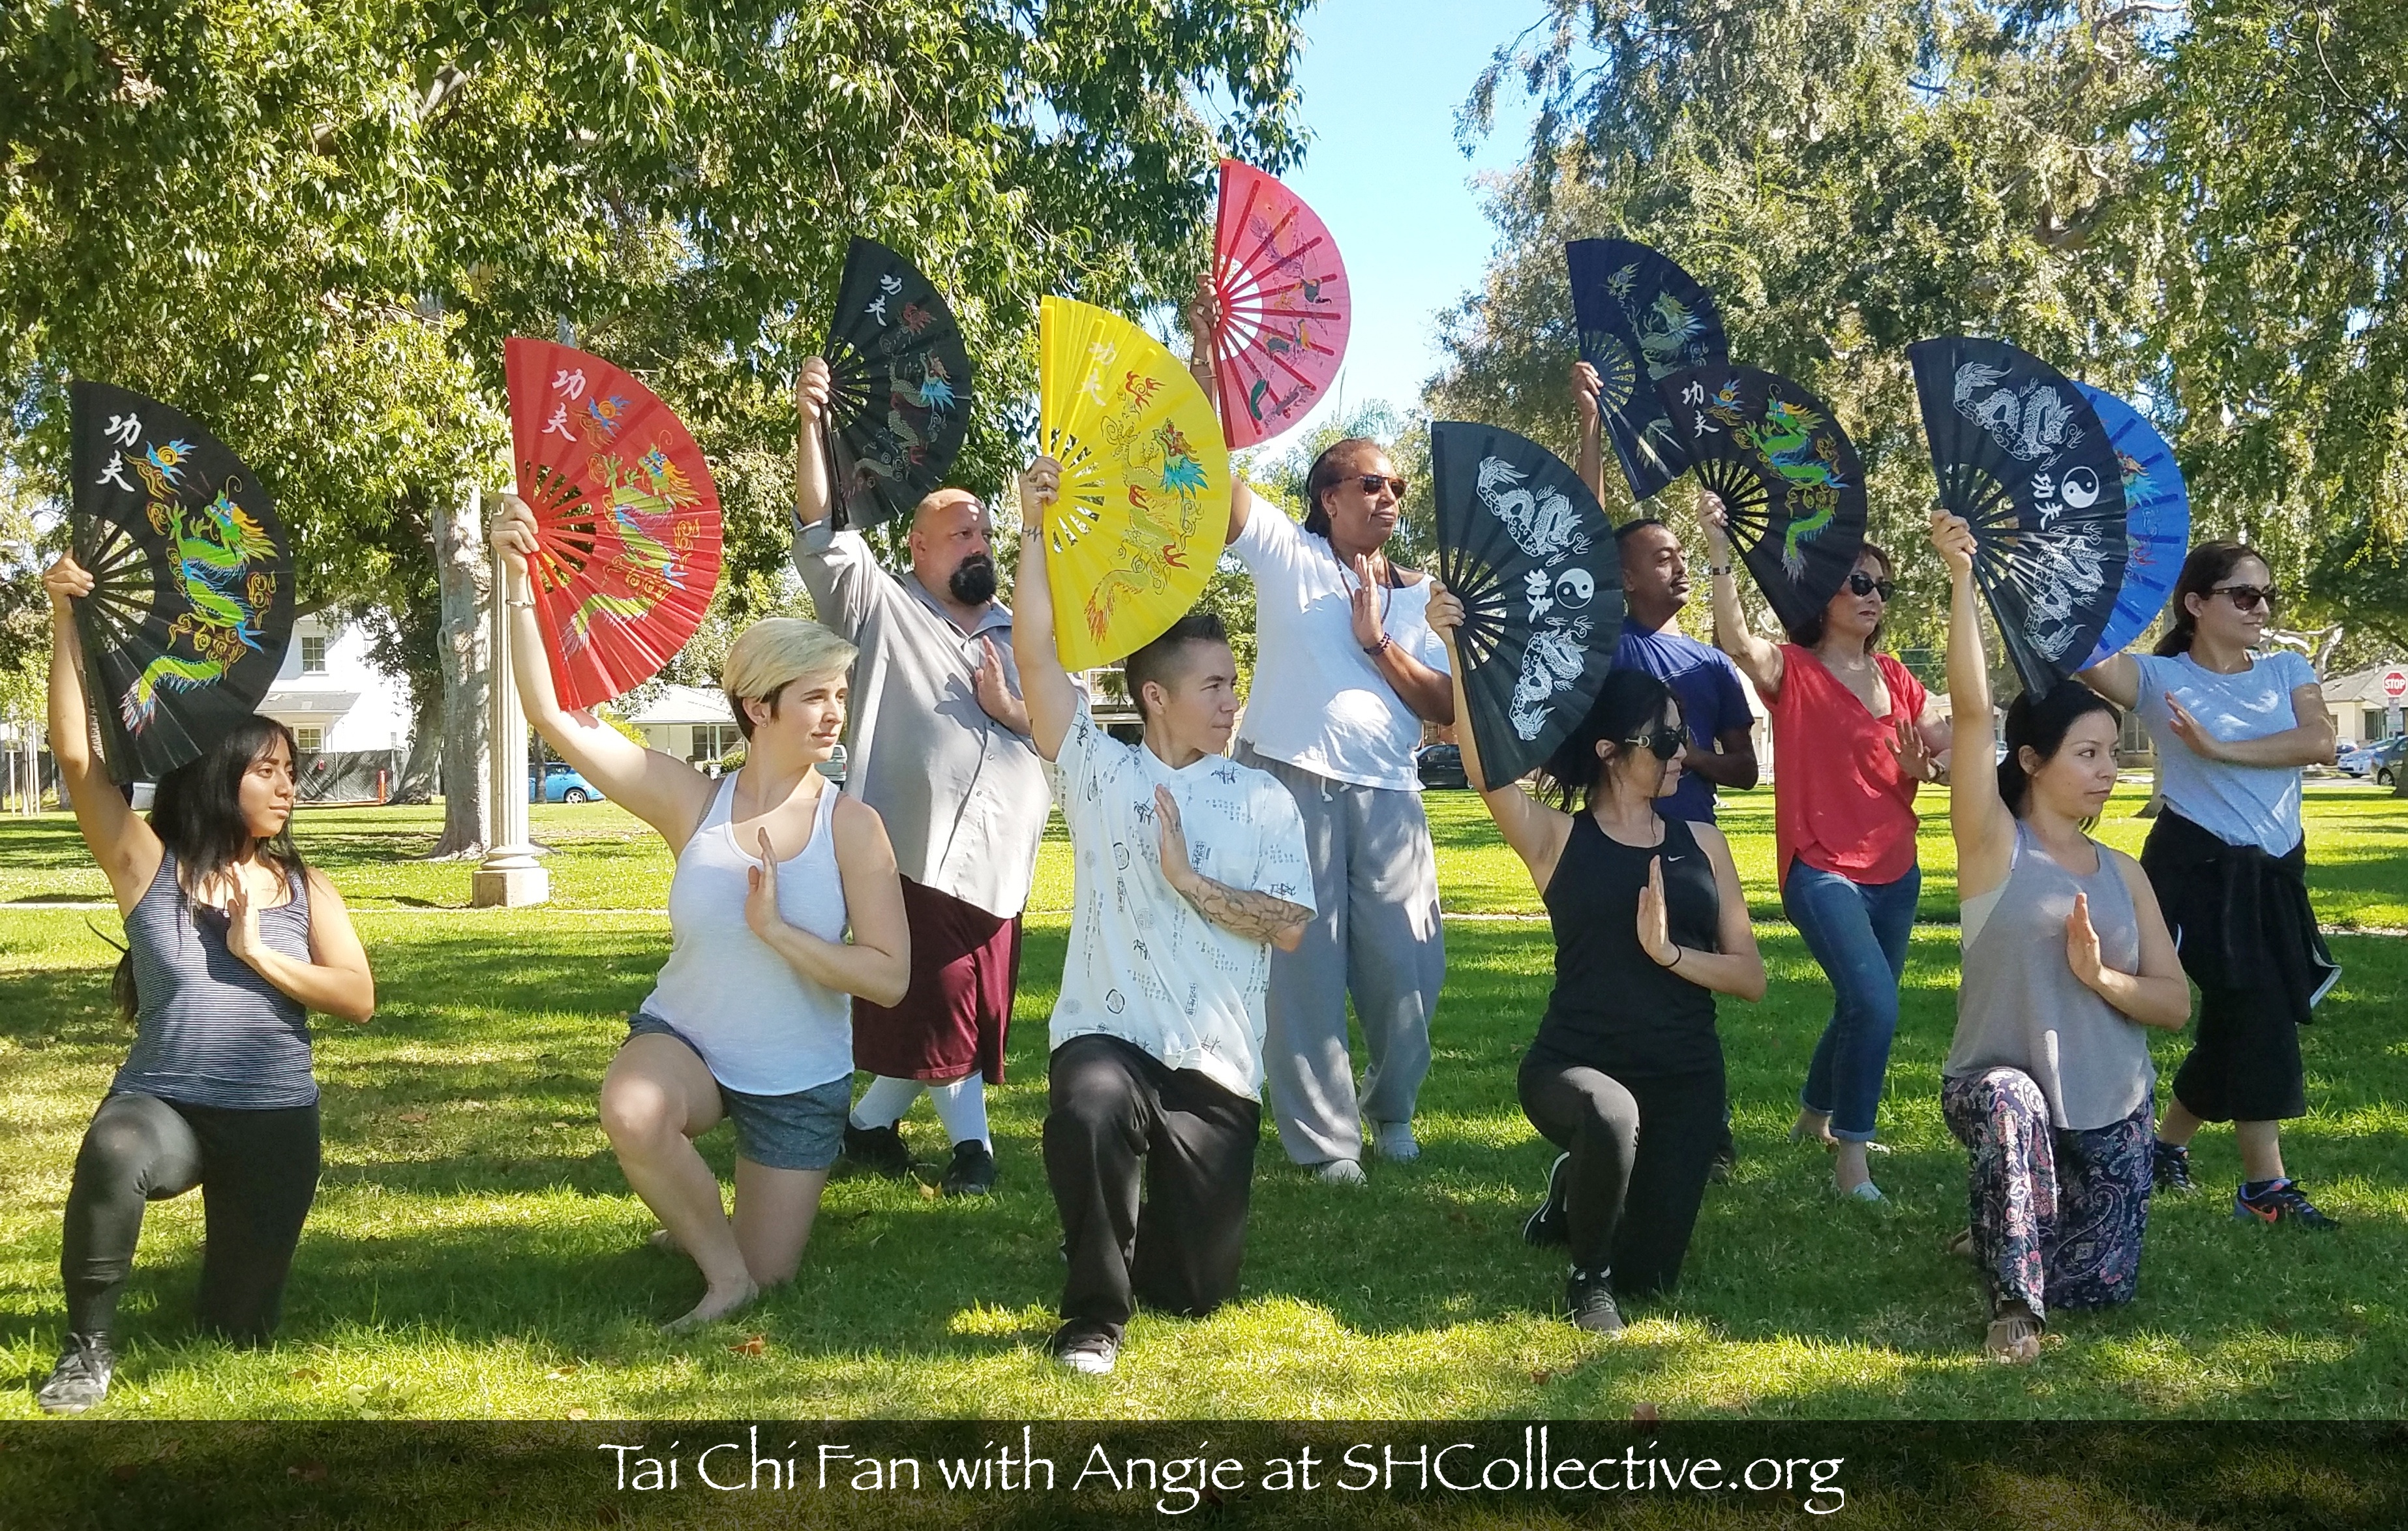 tai chi instructor Angie Sierra with her students holding tai chi fans looking to the left and posing 